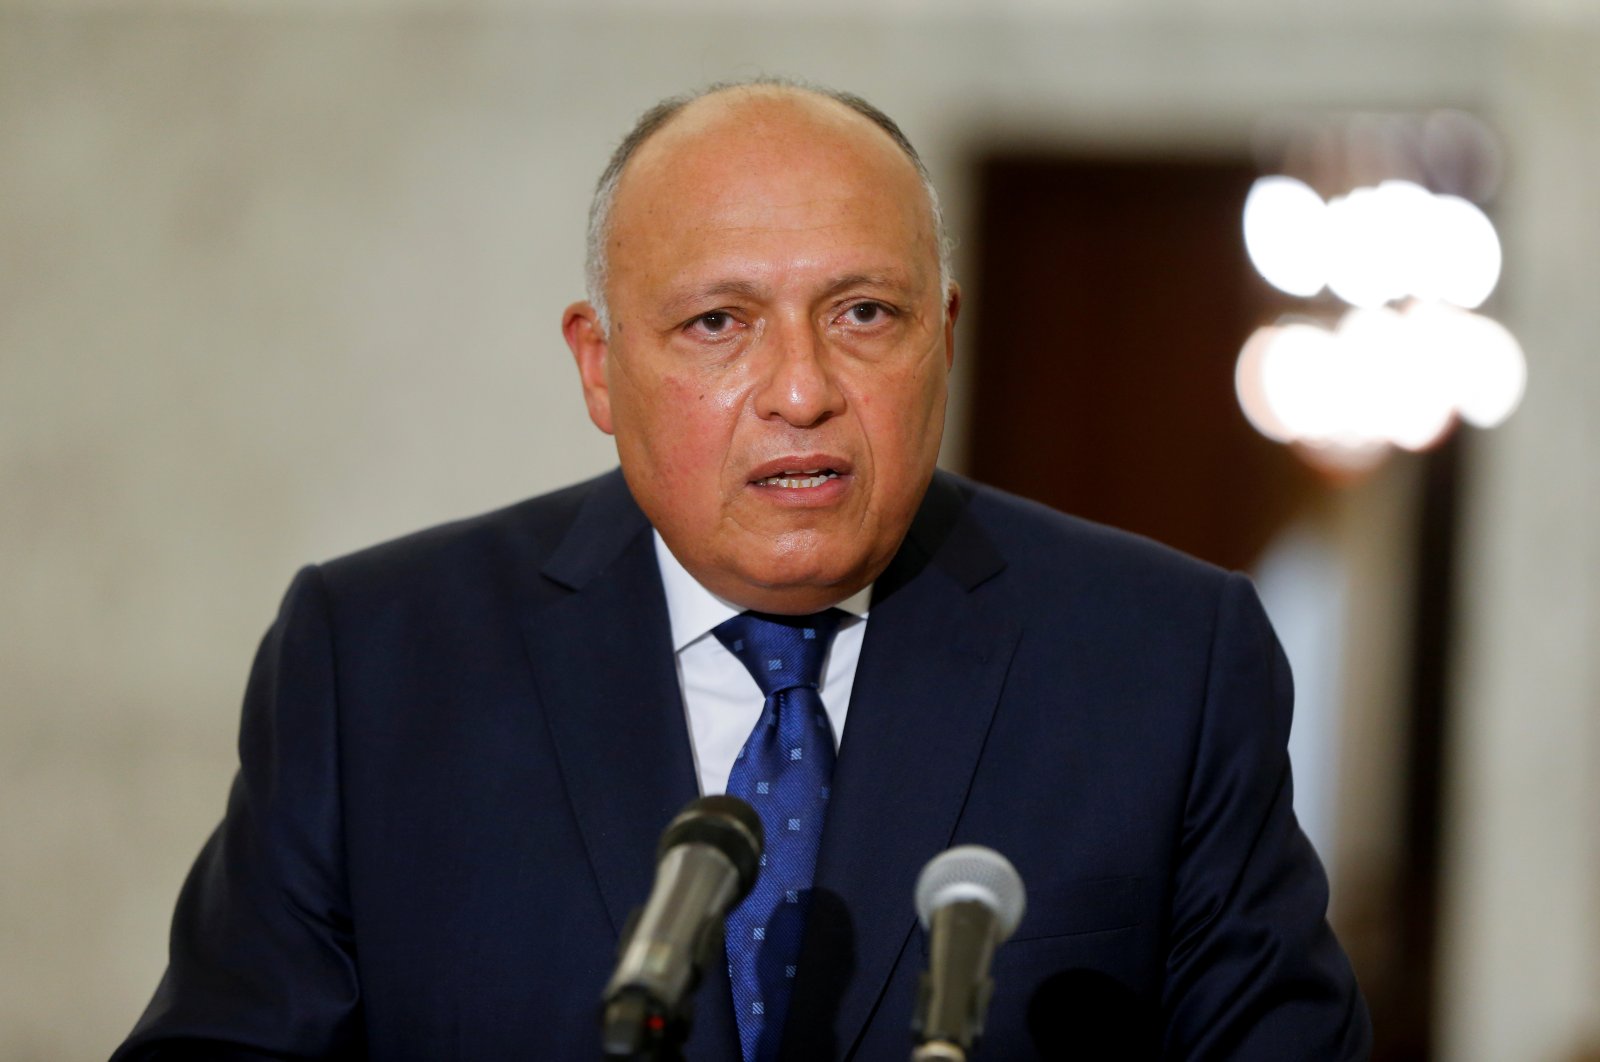 Egyptian Foreign Minister Sameh Shoukry speaks after meeting with Lebanon's President Michel Aoun at the Presidential Palace in Baabda, Lebanon, April 7, 2021. (Reuters File Photo)